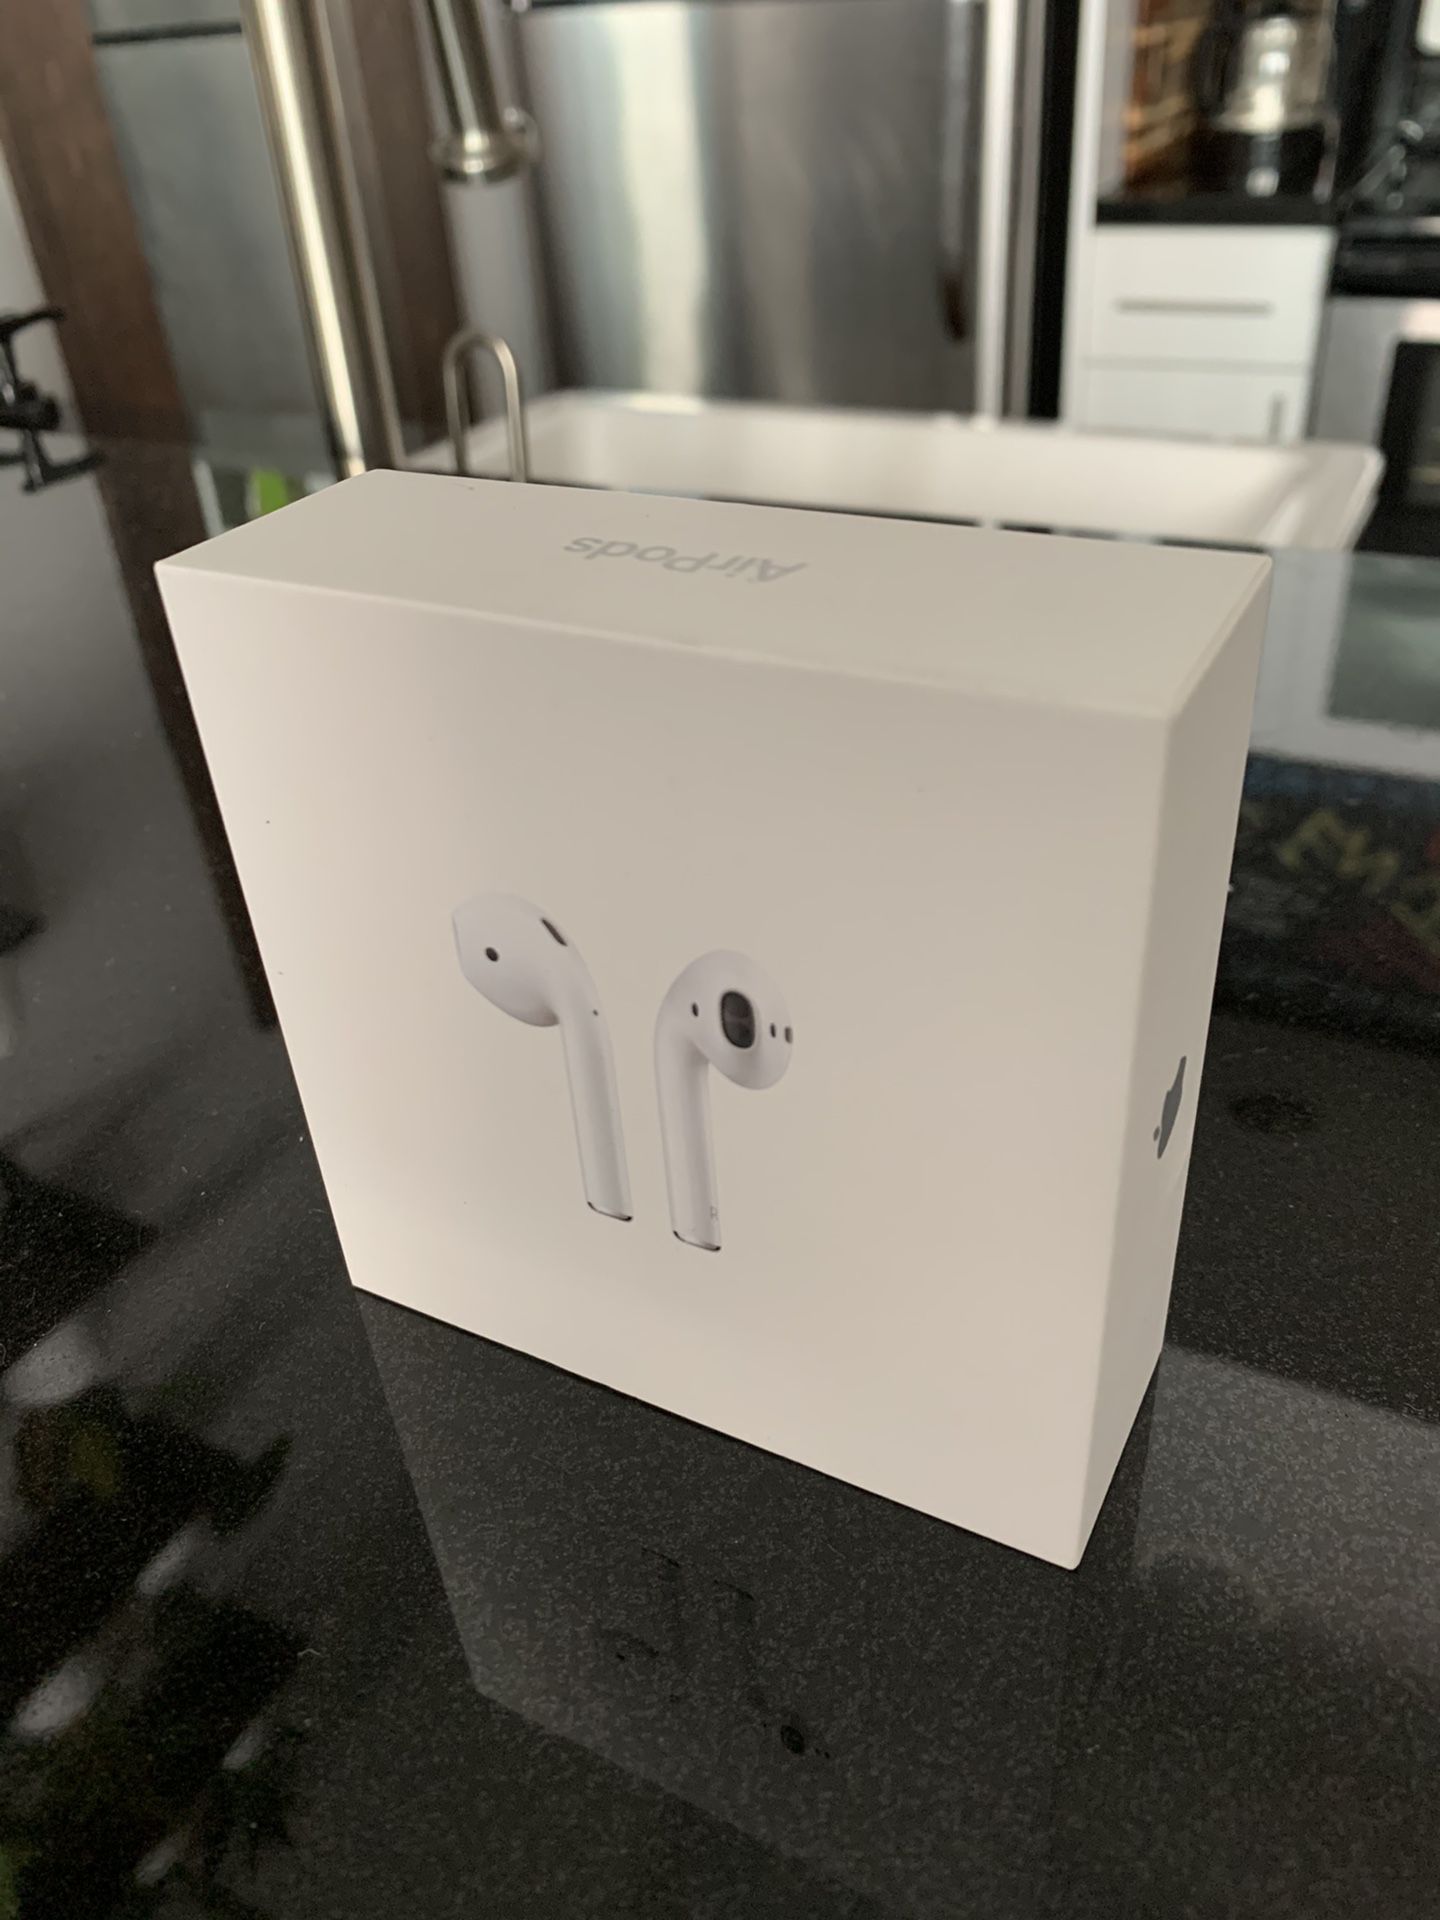 Apple AirPods!